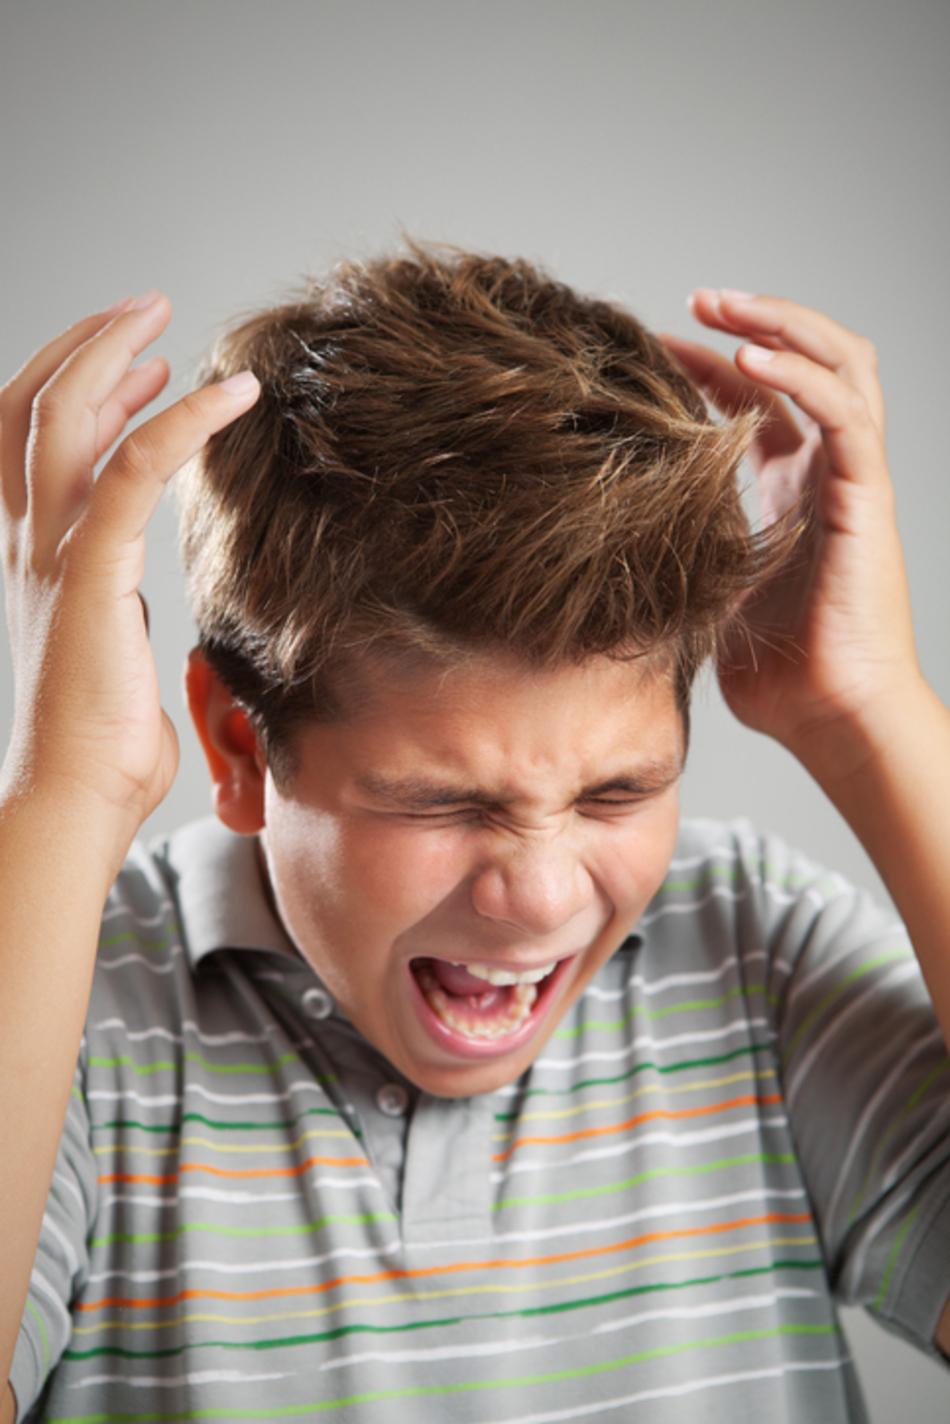 What to Do When a Teen's Anger Spirals Out of Control